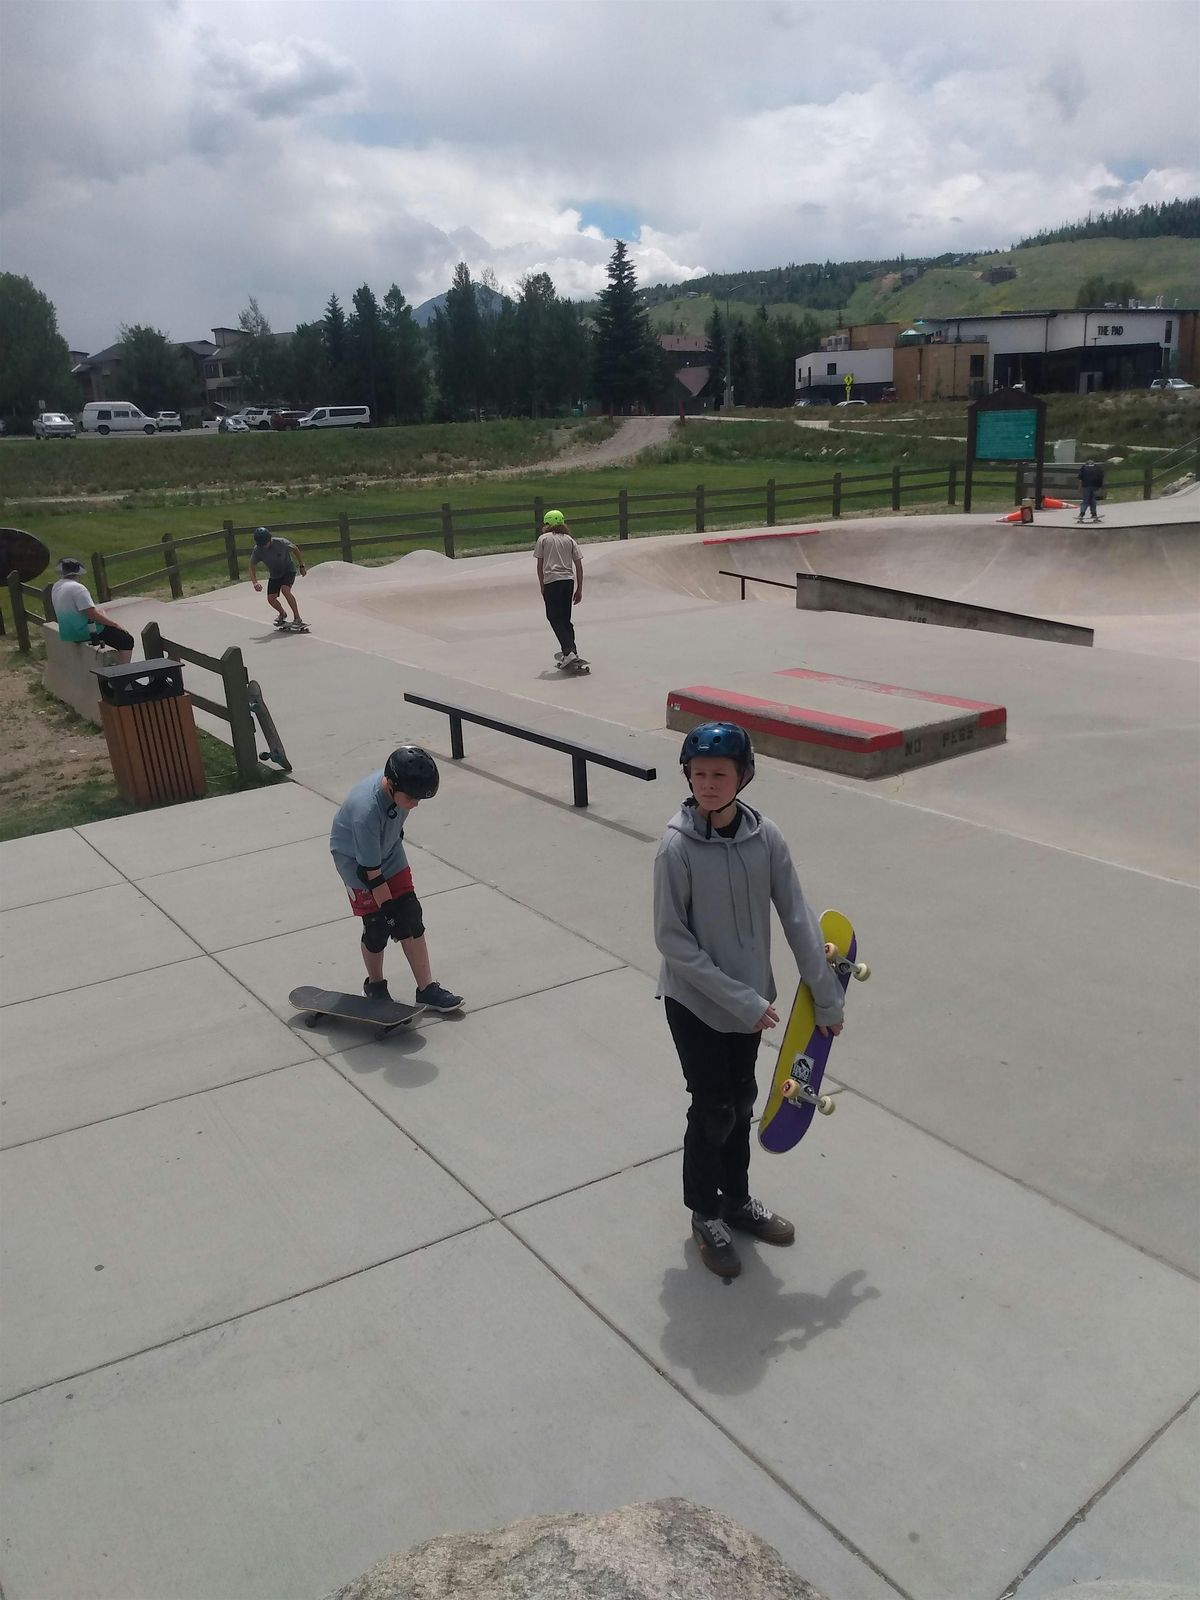 HYPE: Skateboarding at the Silverthorne Rec Center | Ages 12 -18